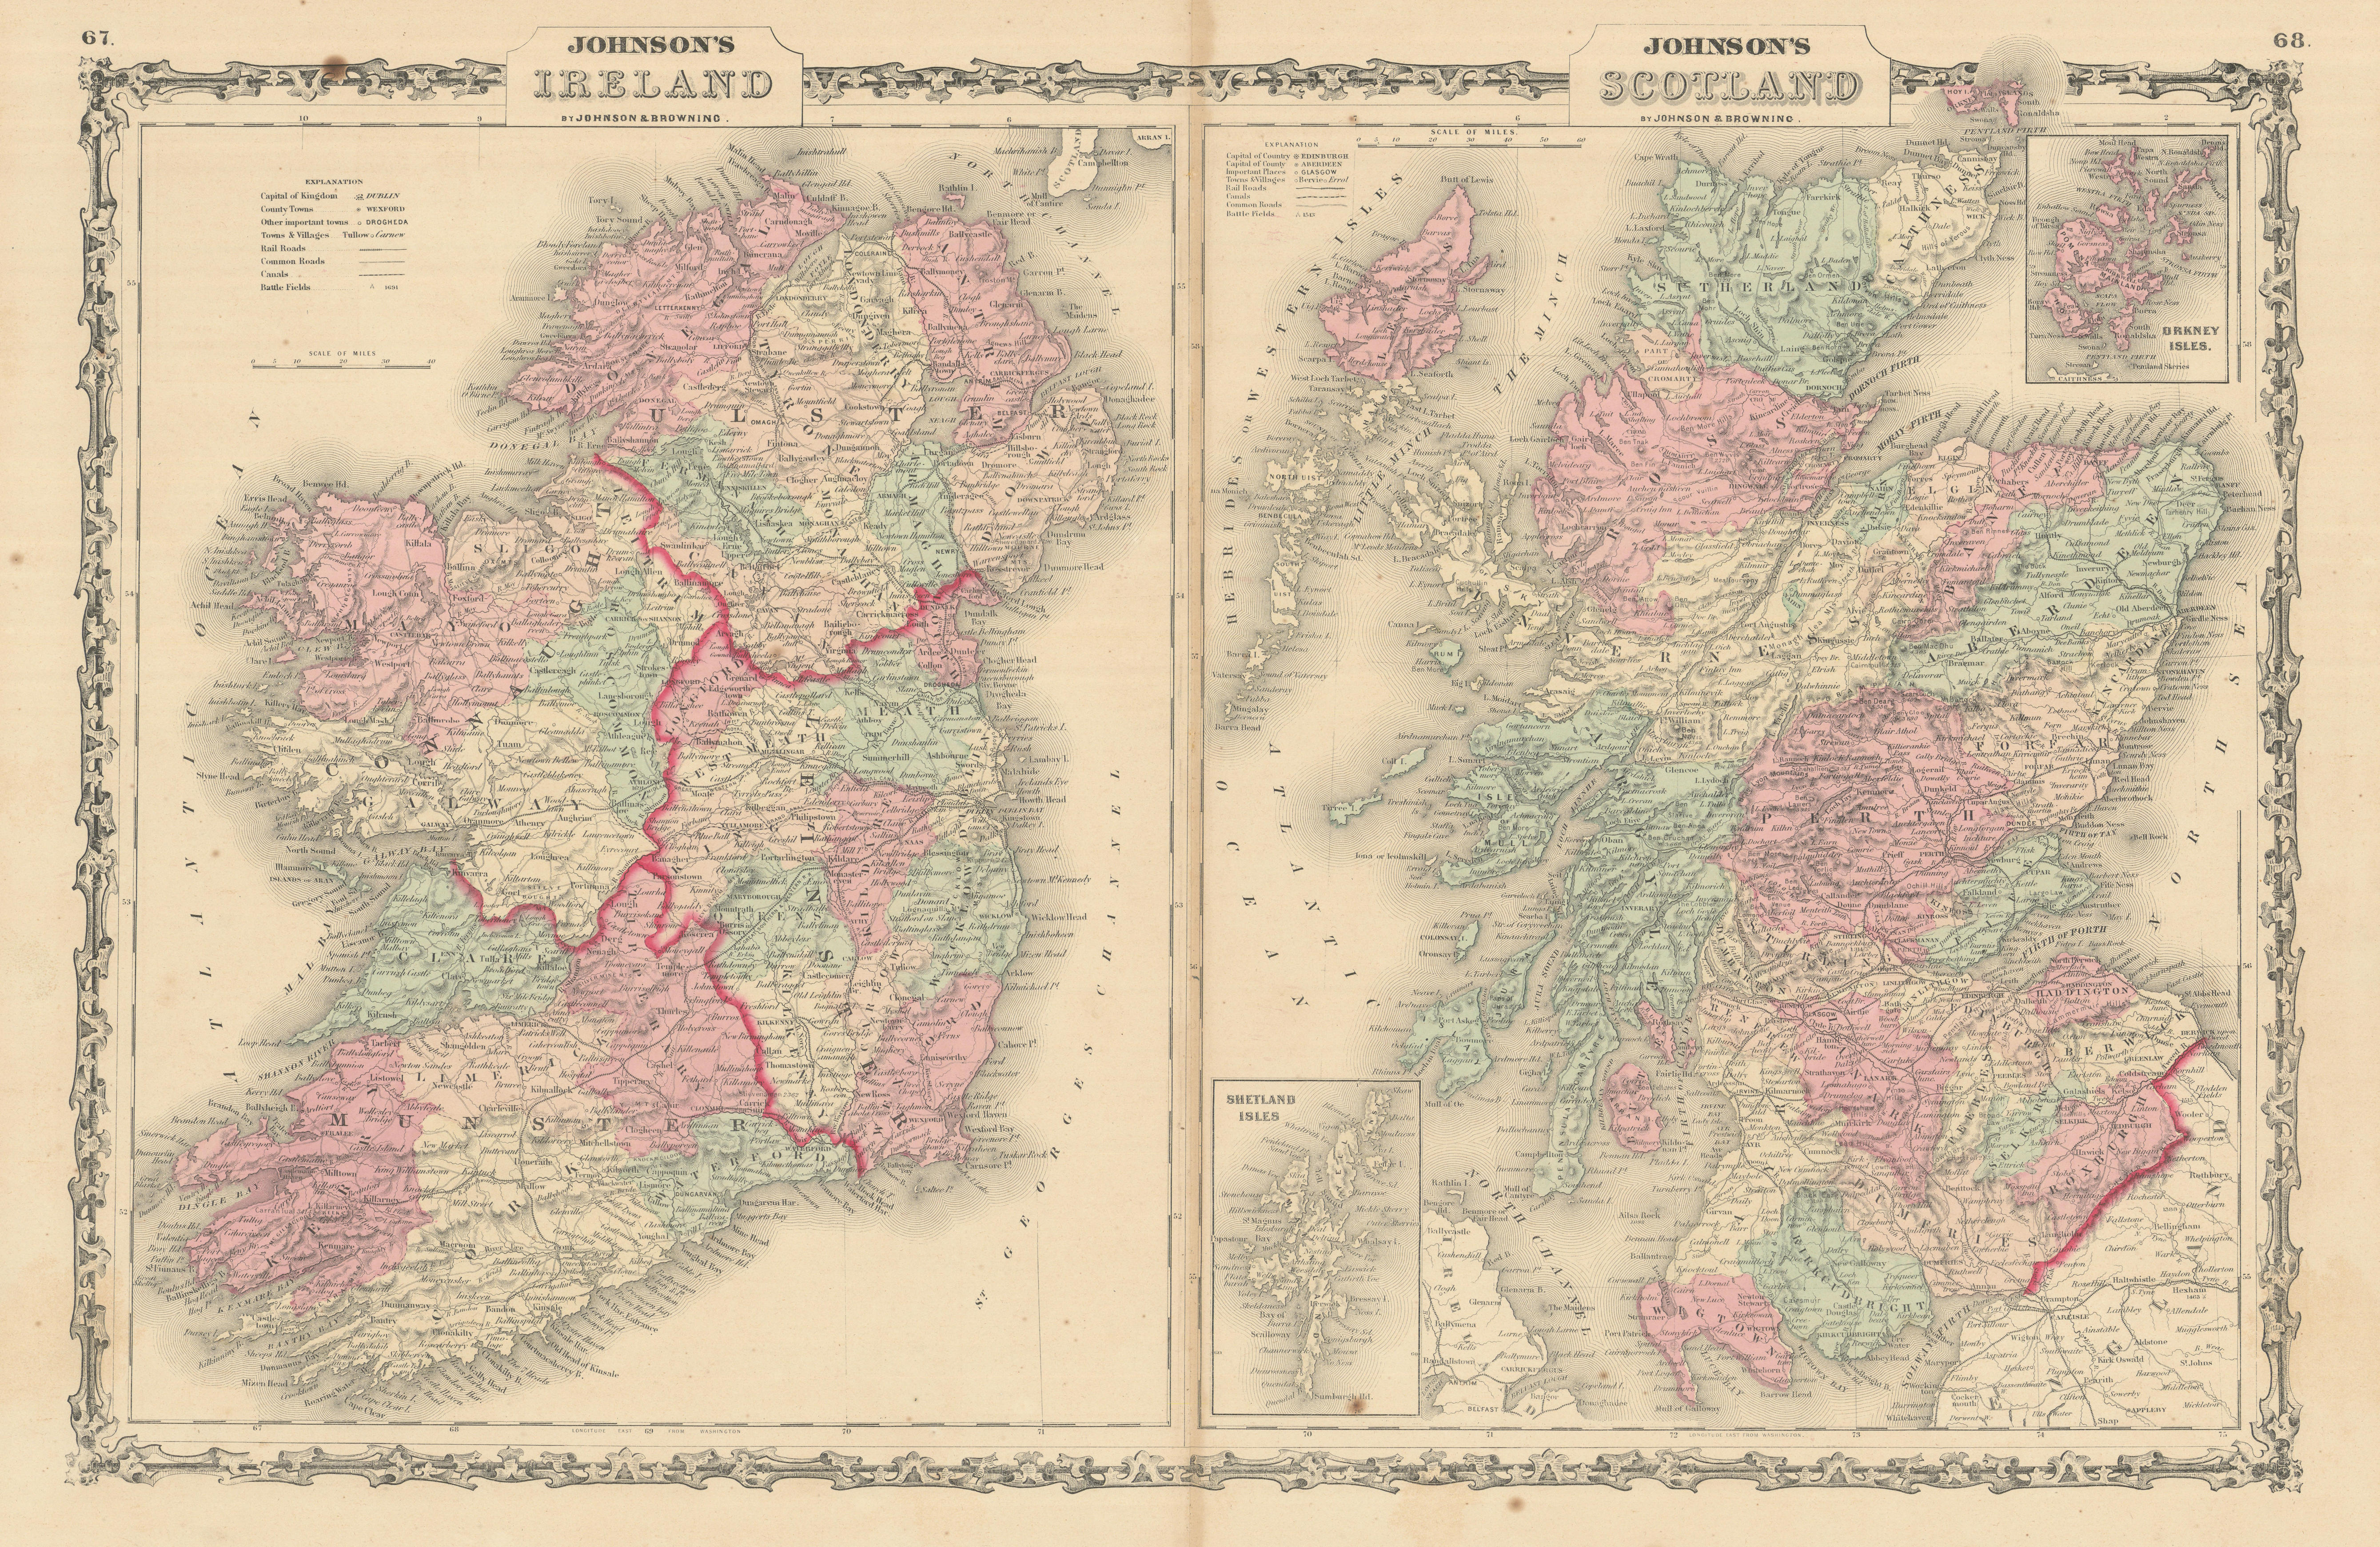 Associate Product Johnson's Ireland & Johnson's Scotland showing counties/provinces 1861 old map